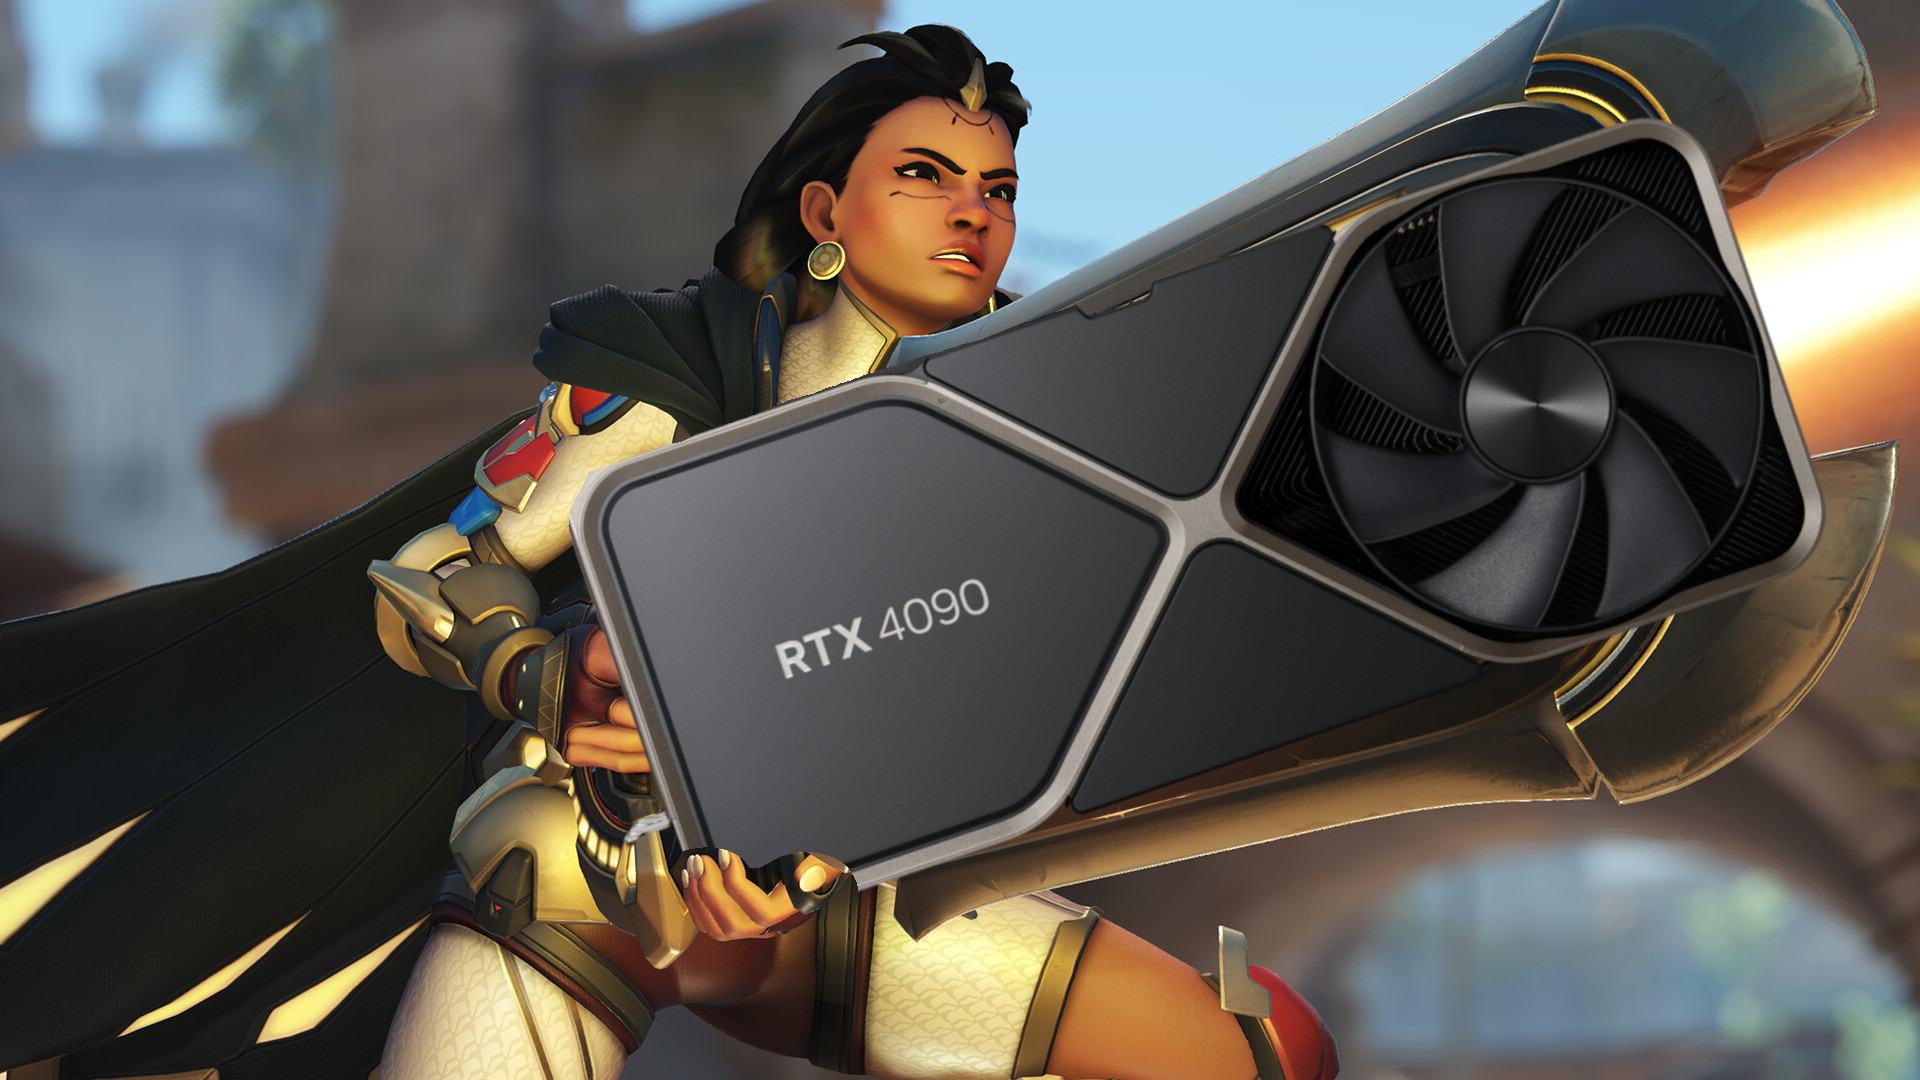 Buy an Nvidia GeForce RTX 40 GPU and get Overwatch 2: Invasion free